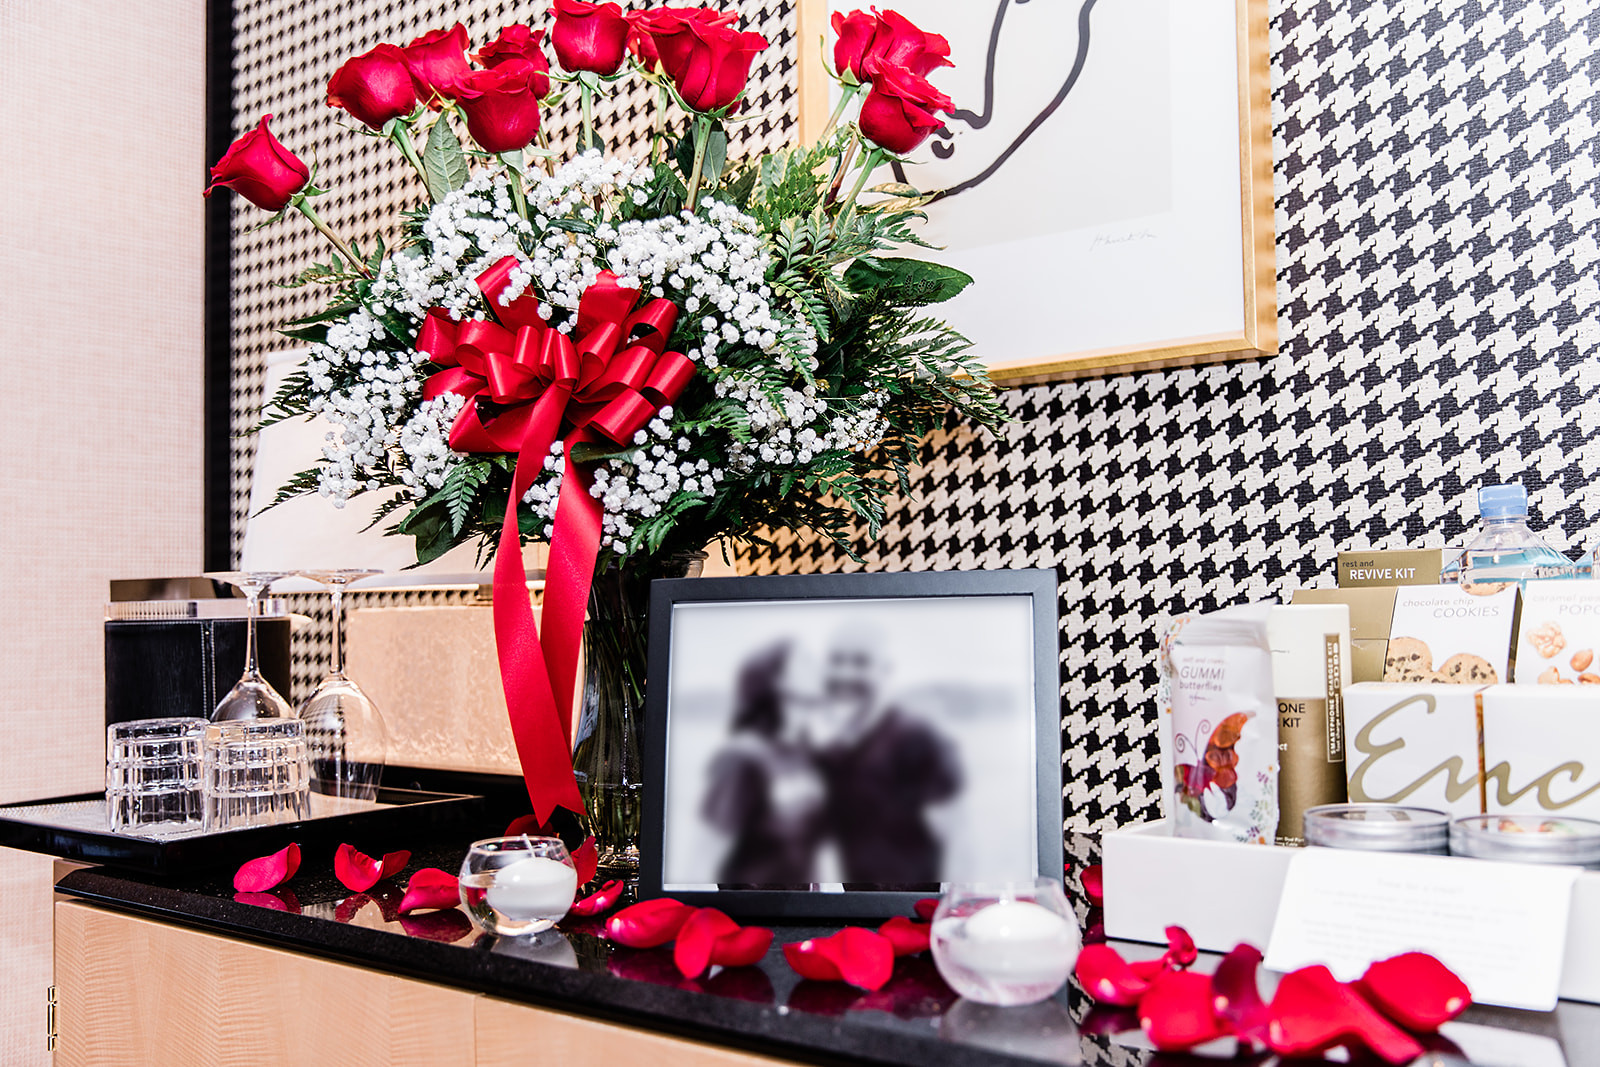 Best Vegas proposal inside hotel room decorated with roses